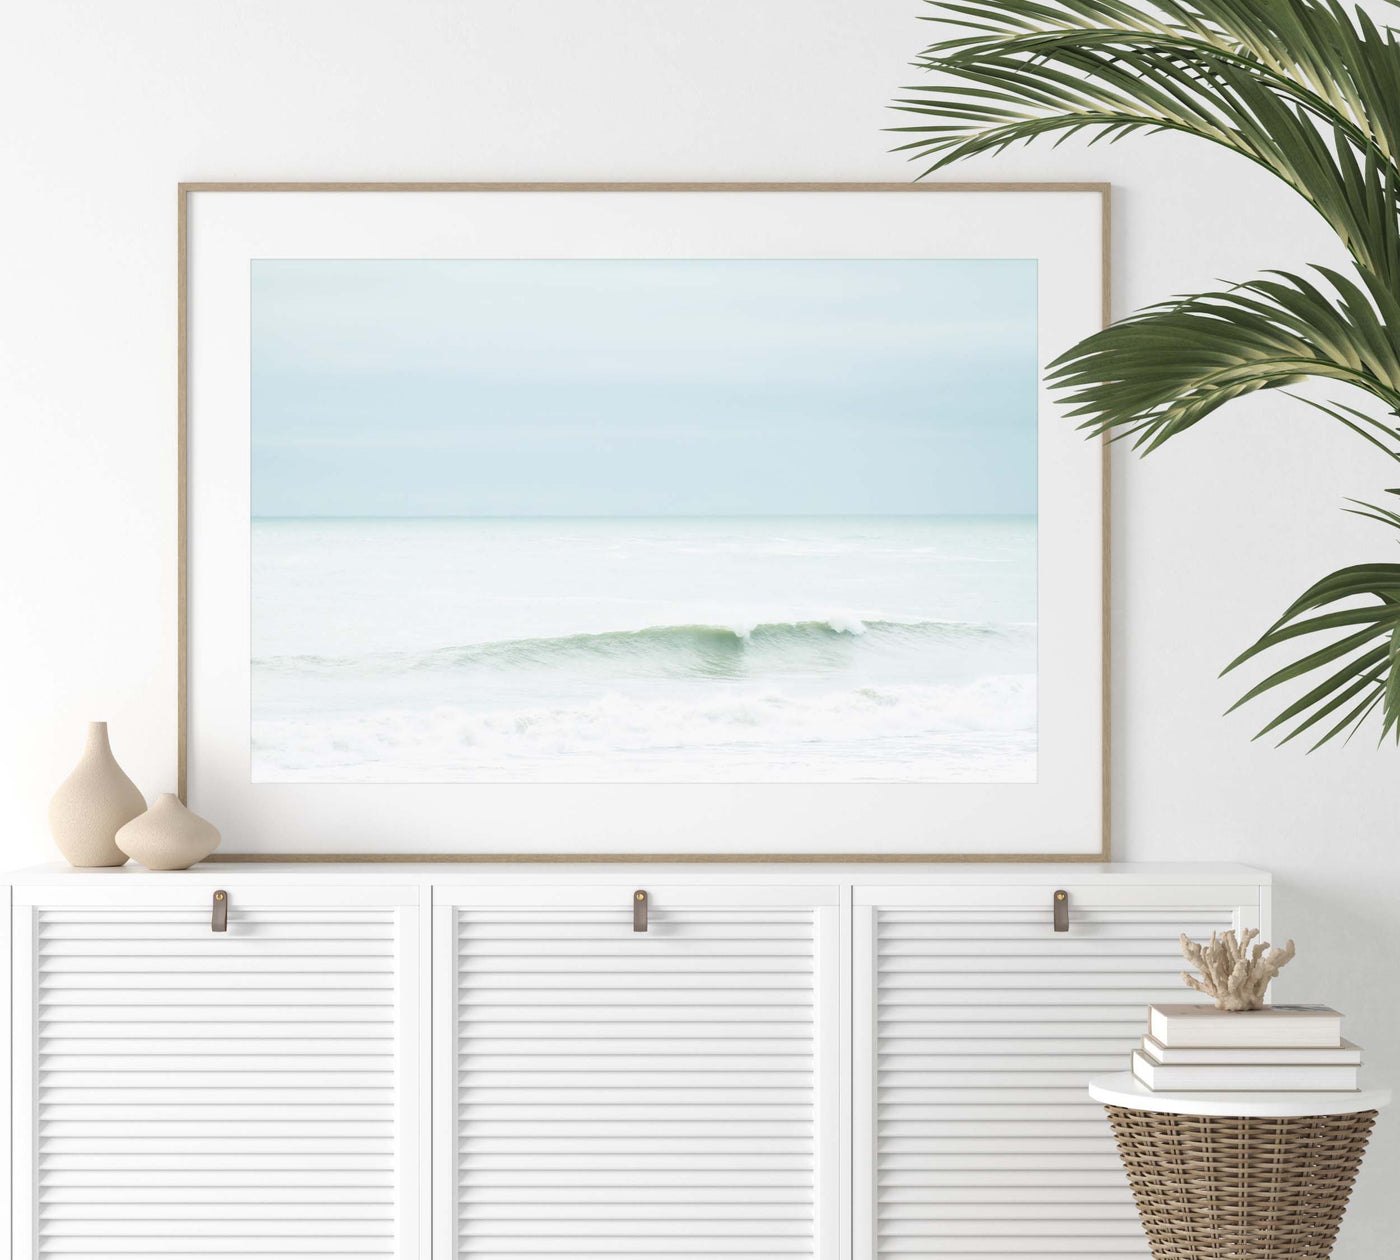 Line on the Horizon No 1 - Fine art print by Cattie Coyle Photography on dresser